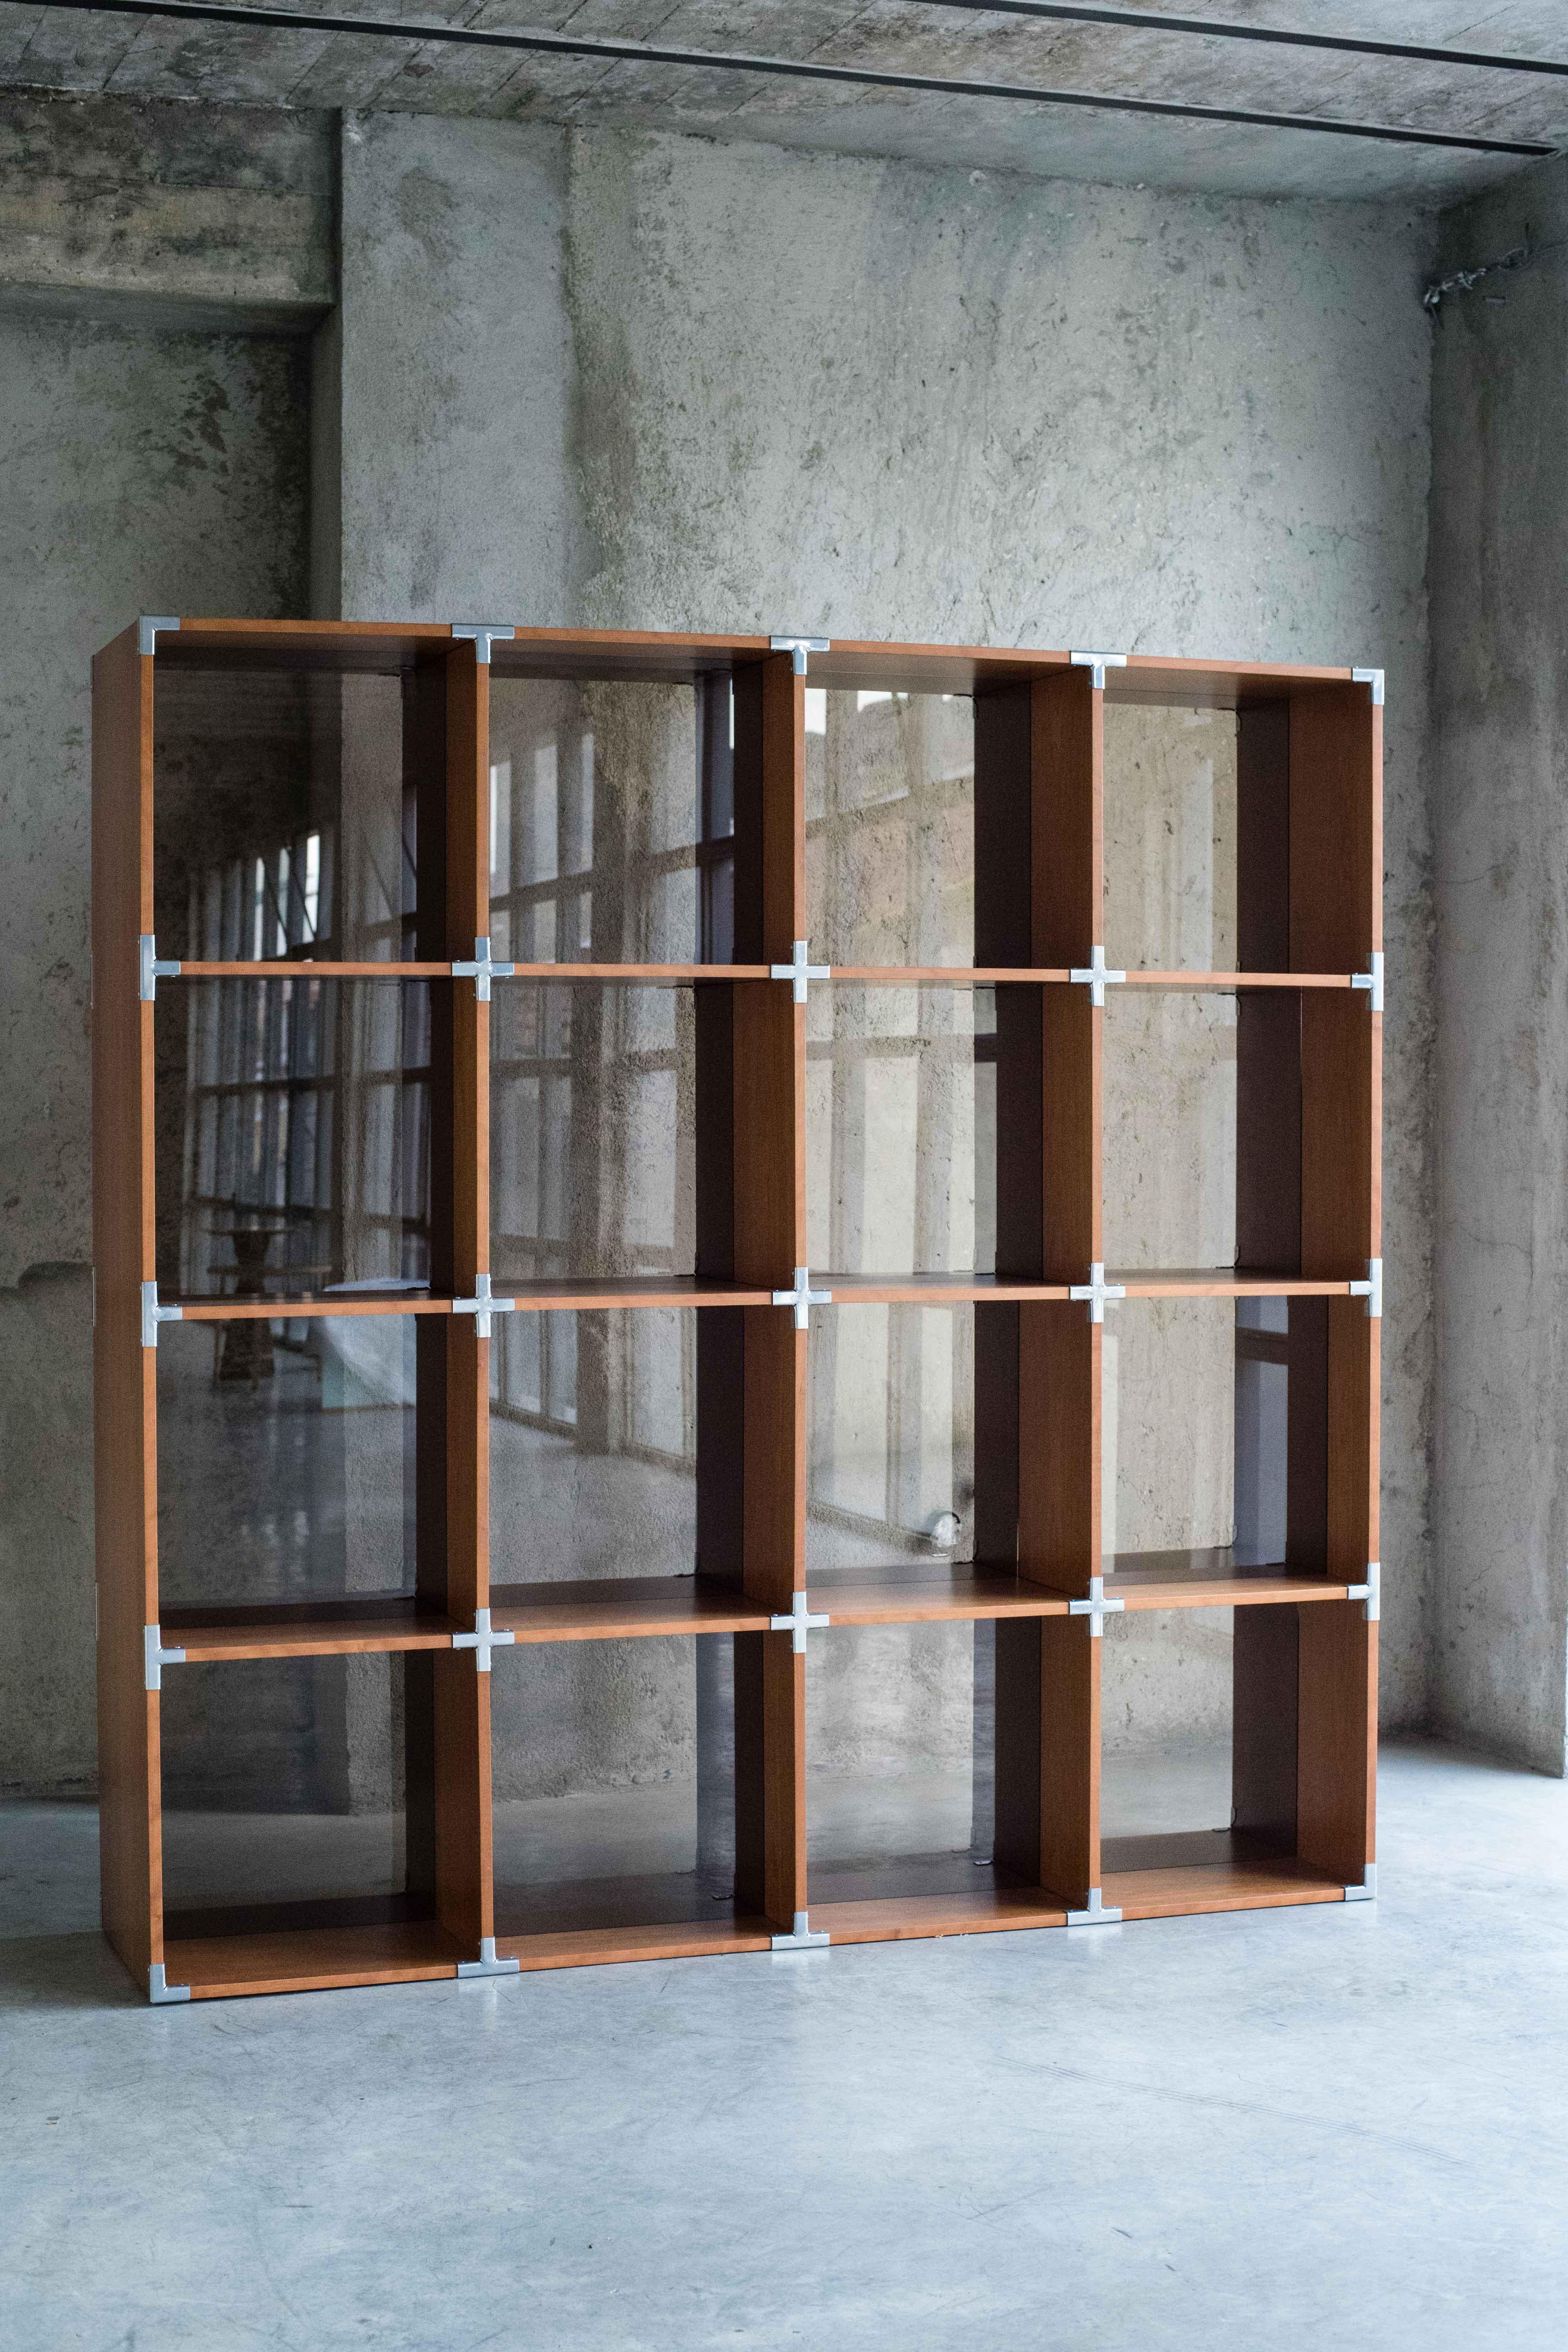 BIS bookshelf by MOB 
Limited editions of 15 + 1 prototype
Designer: Benjamin Ossa (Chile)
Dimensions: H 210 x D 50 x W 210 cm
Material: Cherry tree veneer 18mm, steel chrome unions, reflective brown glass

The BIS project for MOB seeks to be